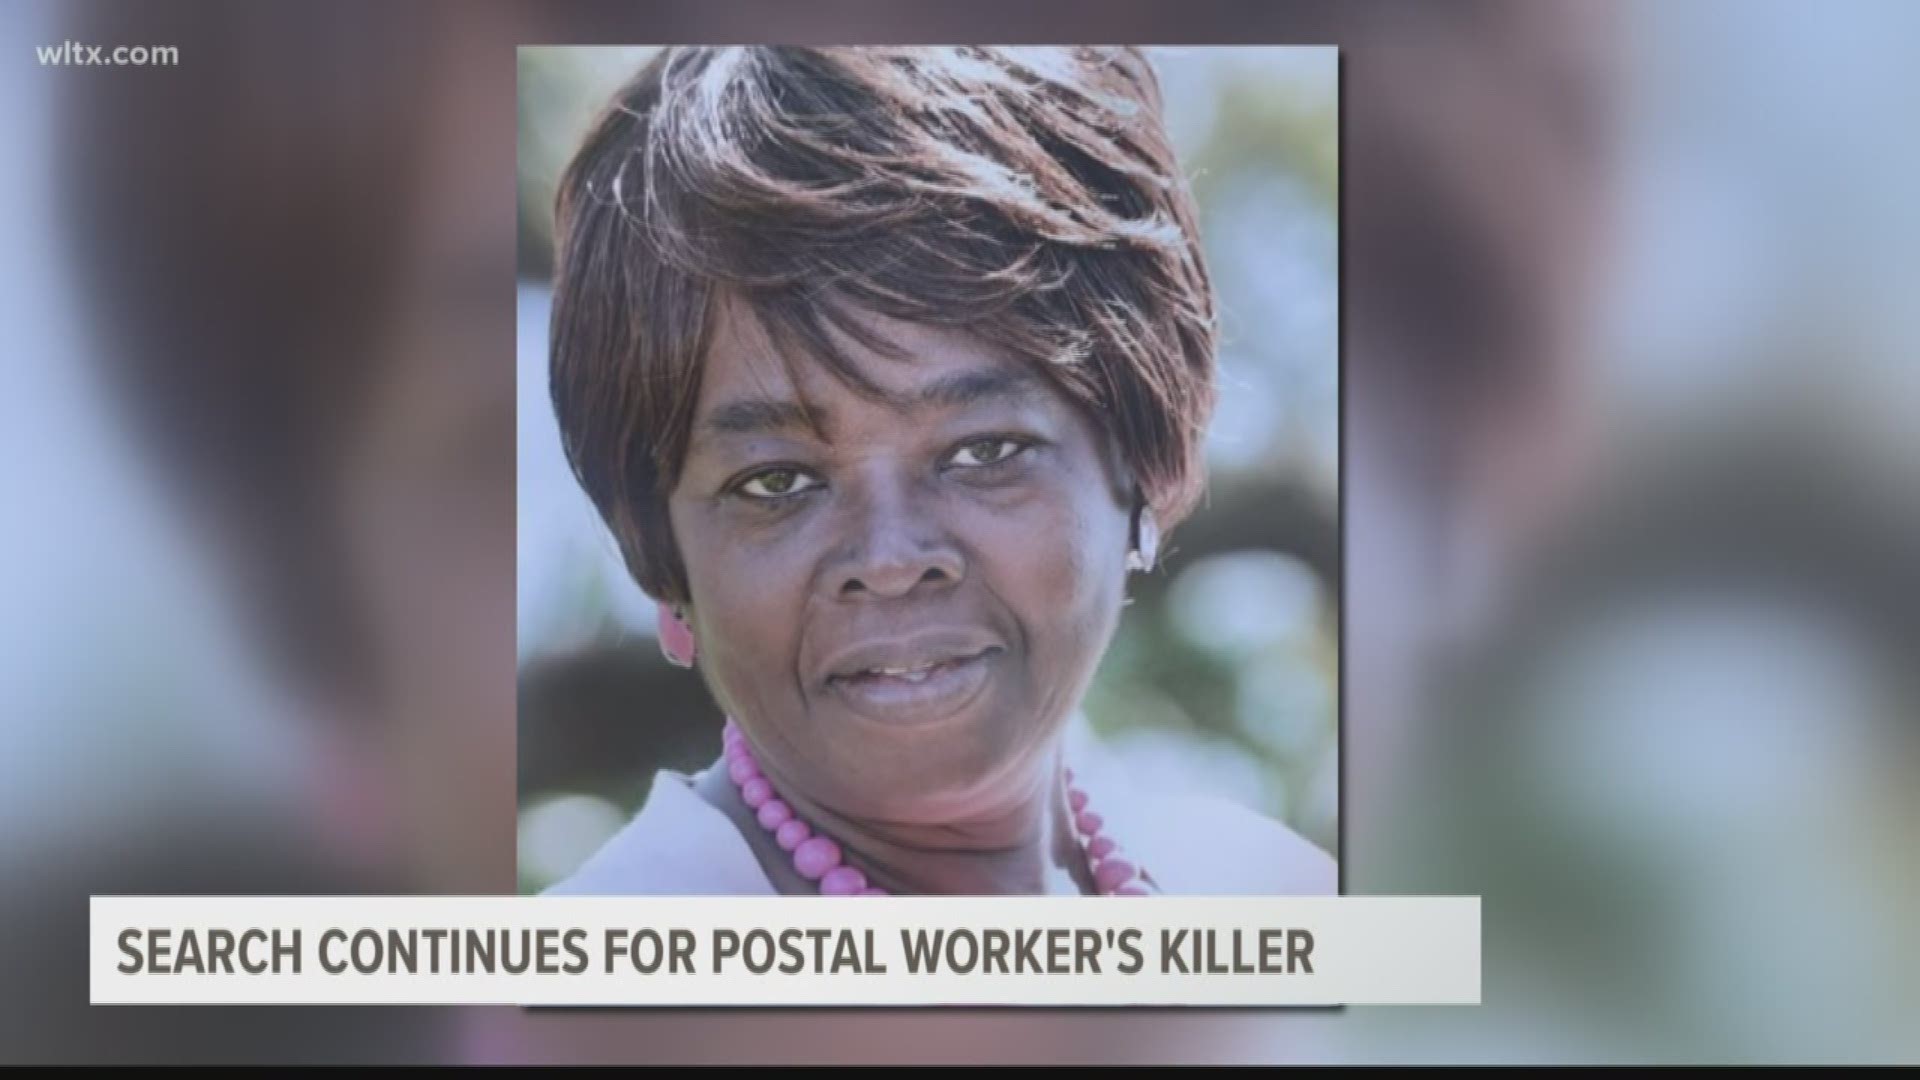 Authorities in South Carolina are asking for the public's help to find whoever shot and killed a U.S. Postal Service worker who was on her delivery route.